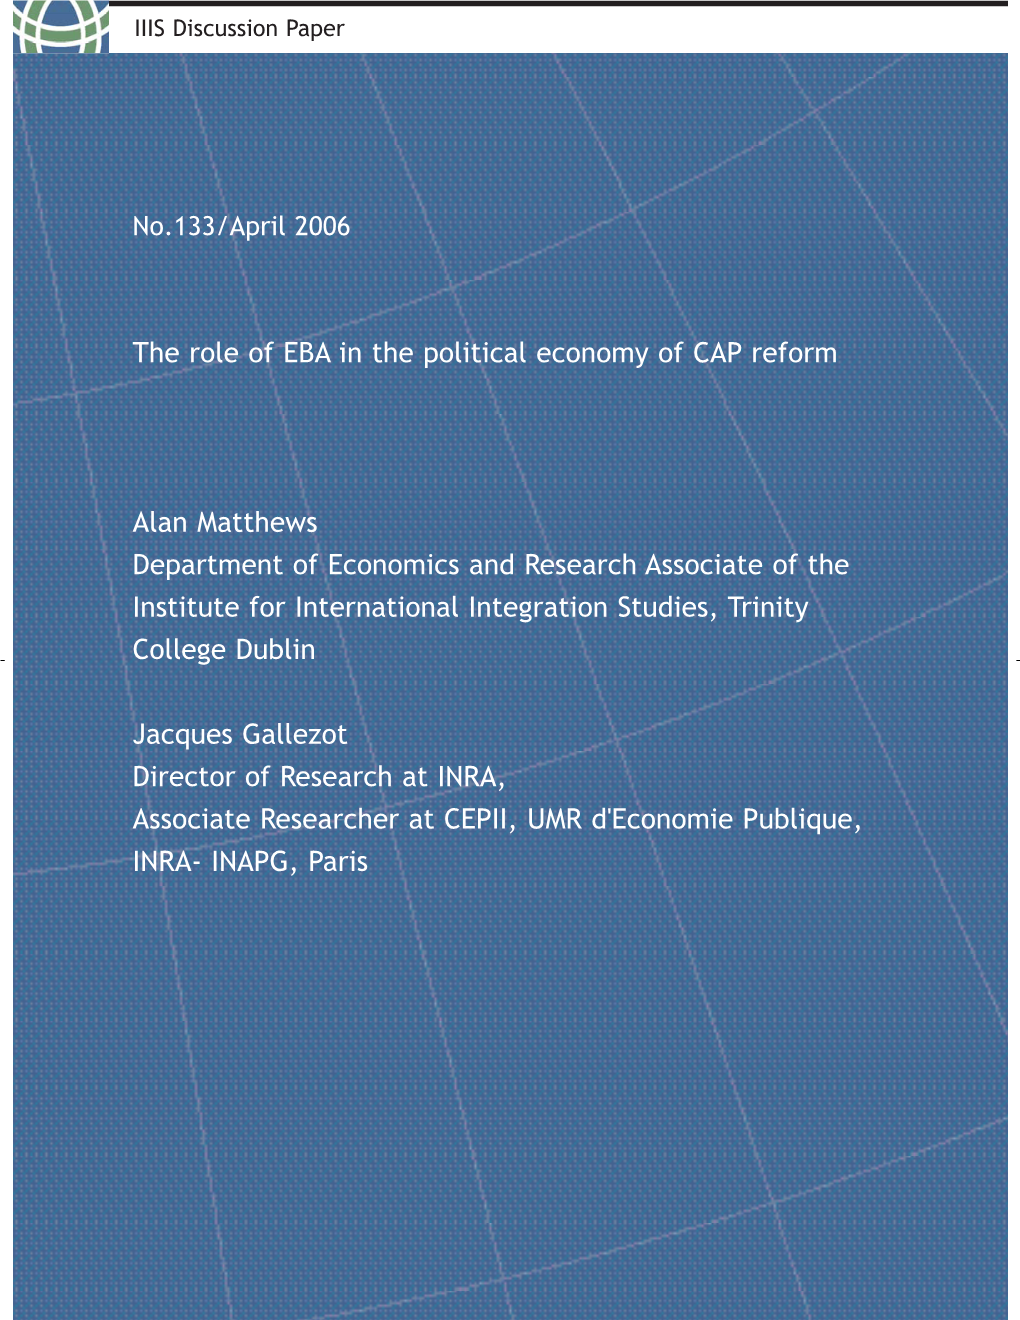 The Role of EBA in the Political Economy of CAP Reform